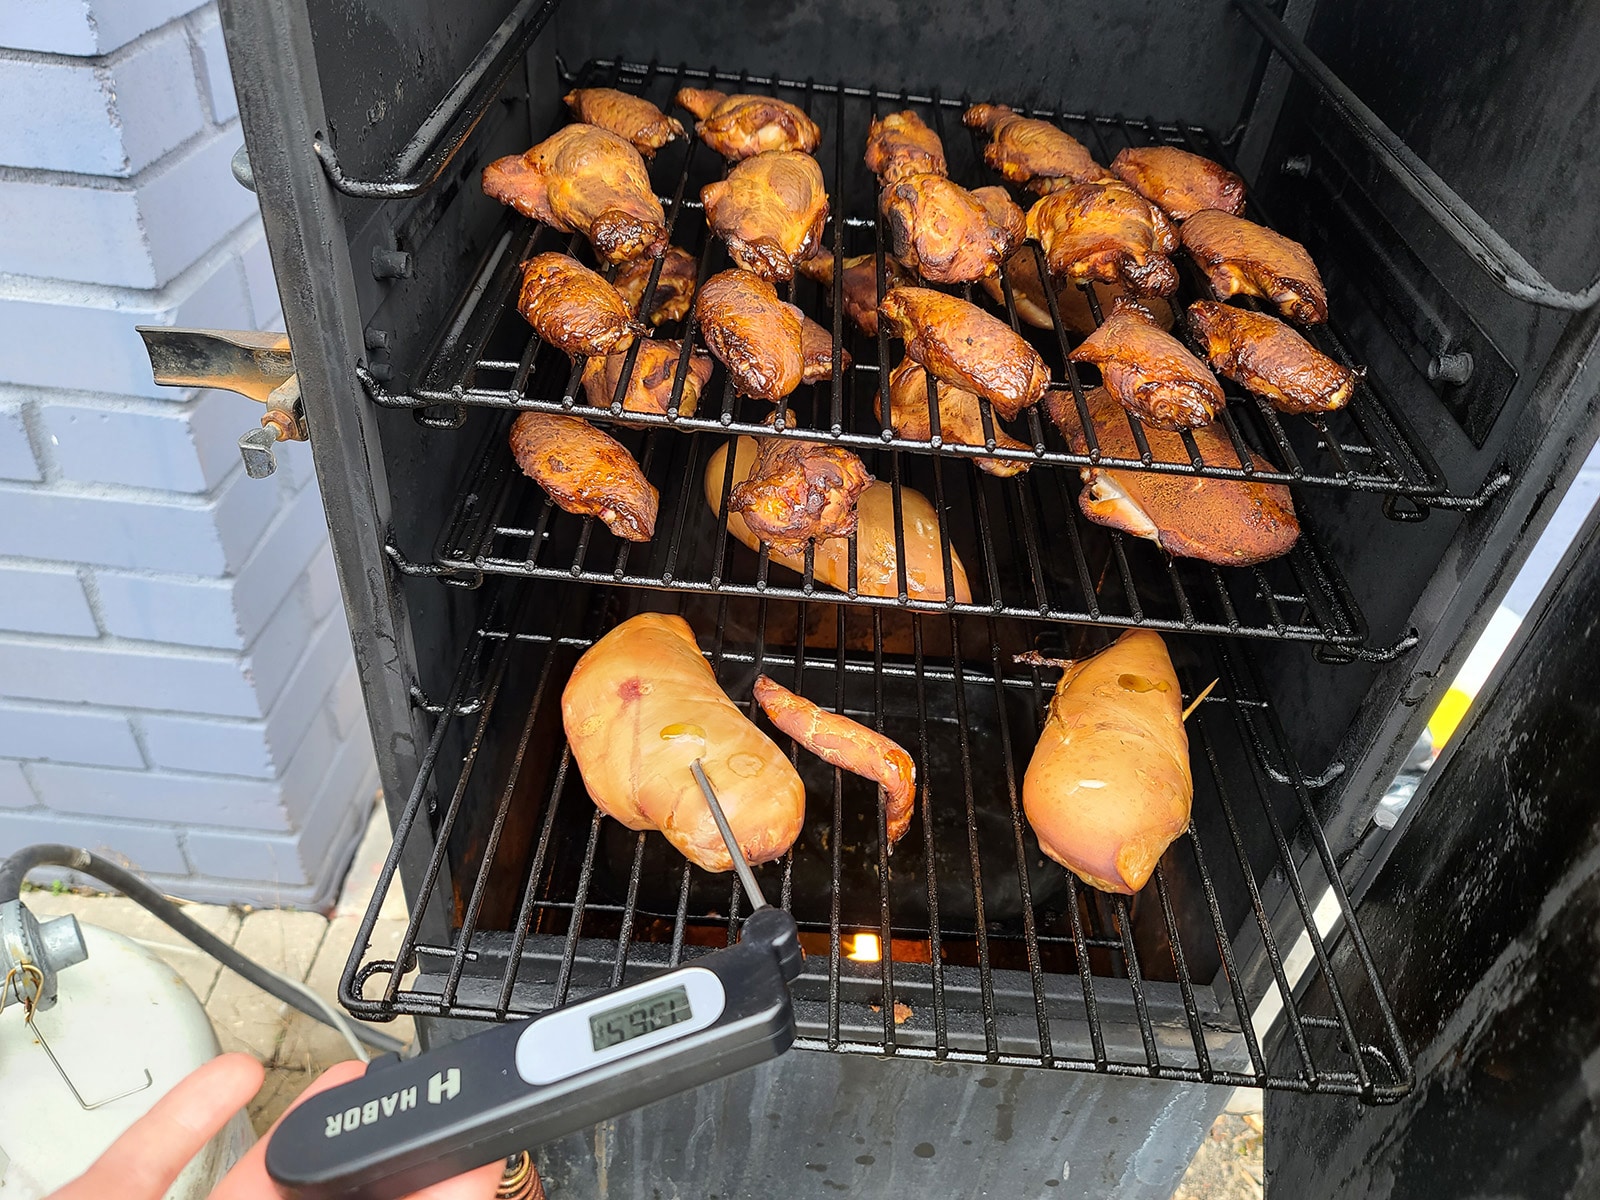 Chicken breasts and wings in a smoker.